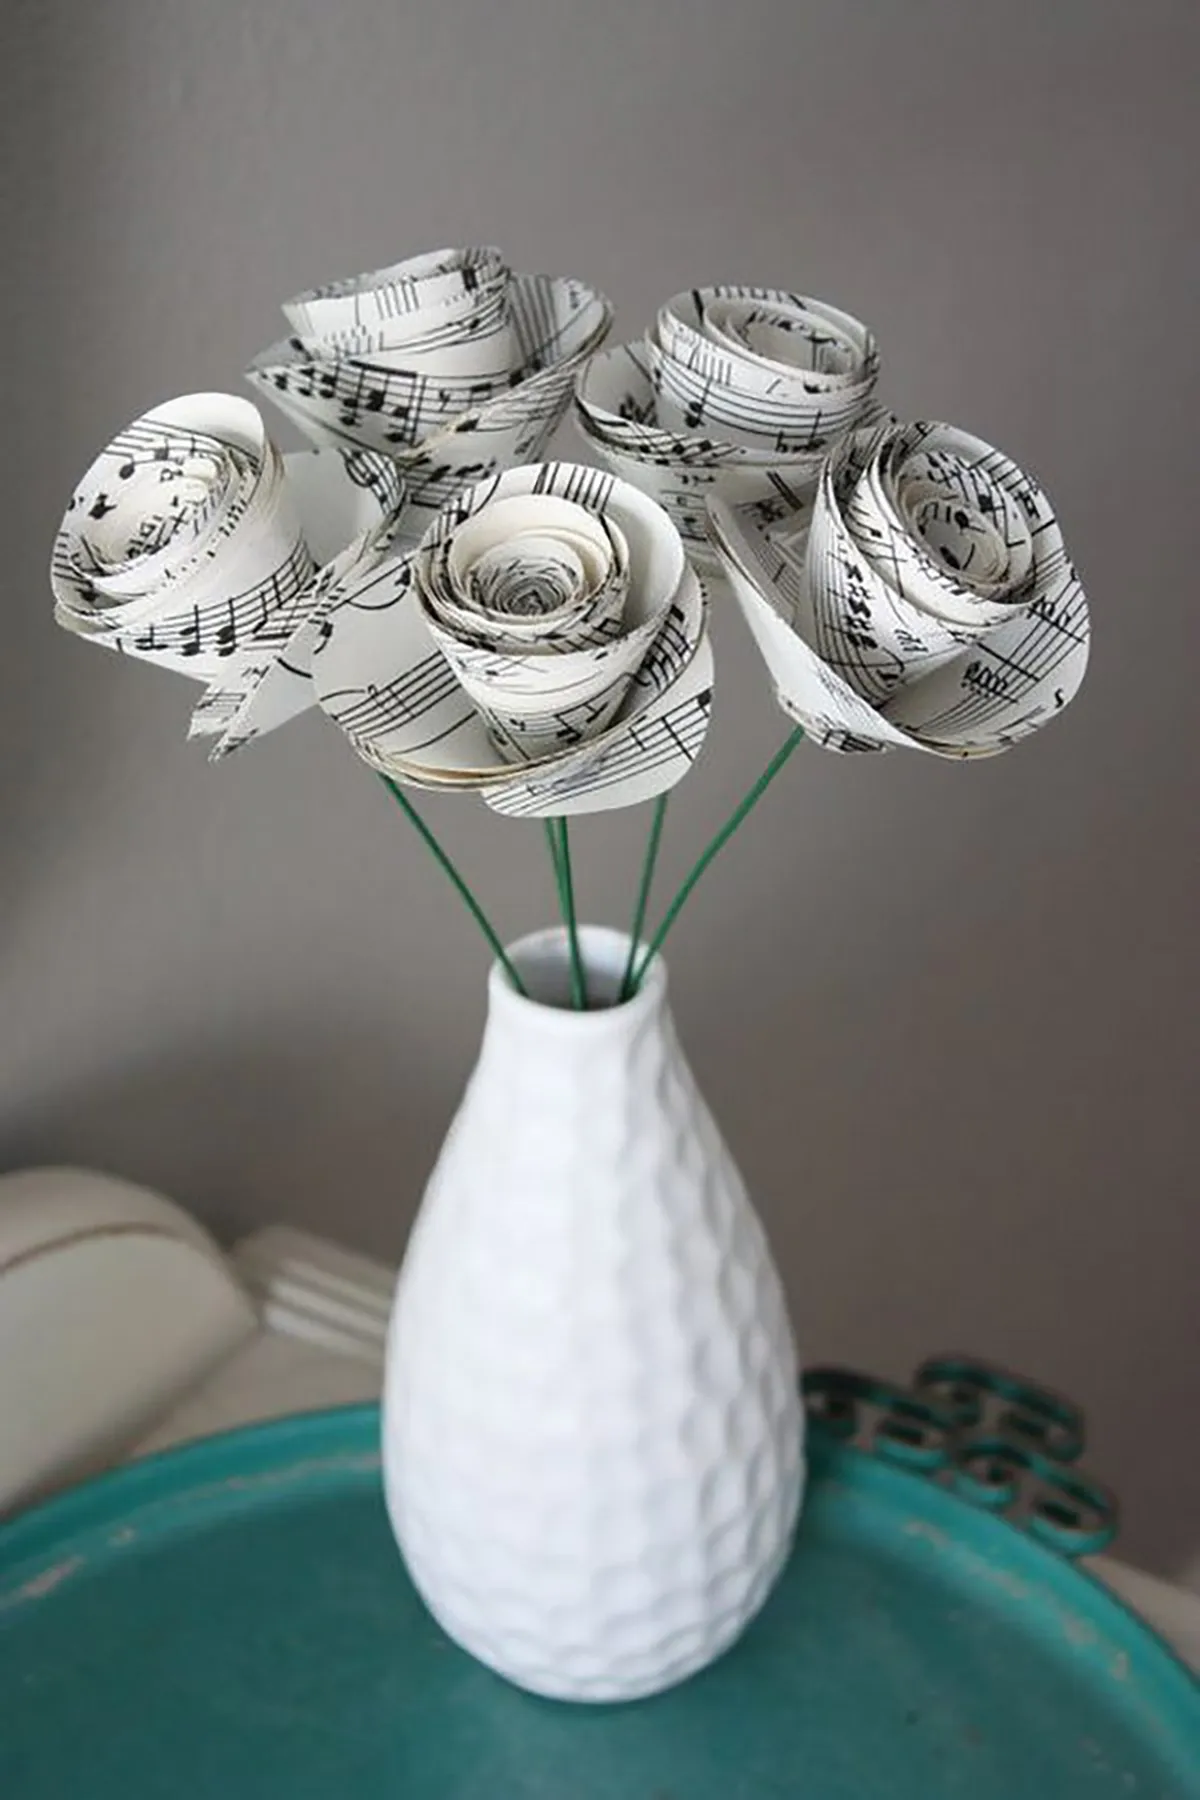 diy valentines decorations - roses made from sheet music